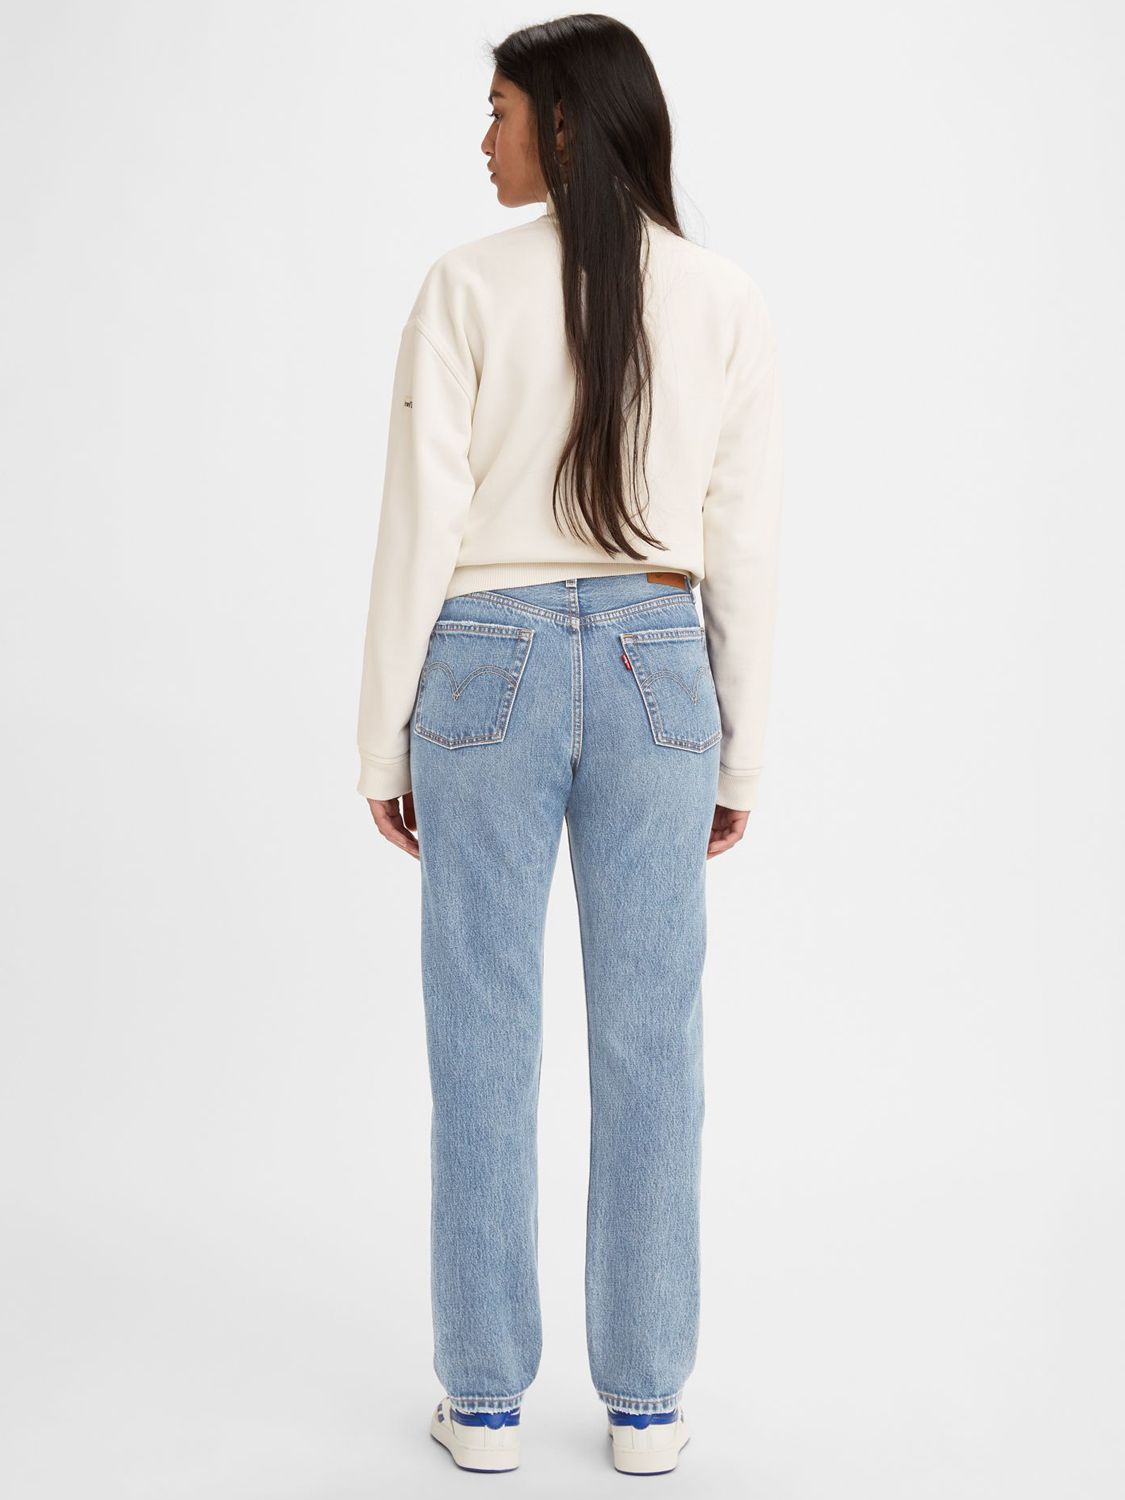 Levi's 501 Straight Cut Jeans, Hollow Days at John Lewis & Partners